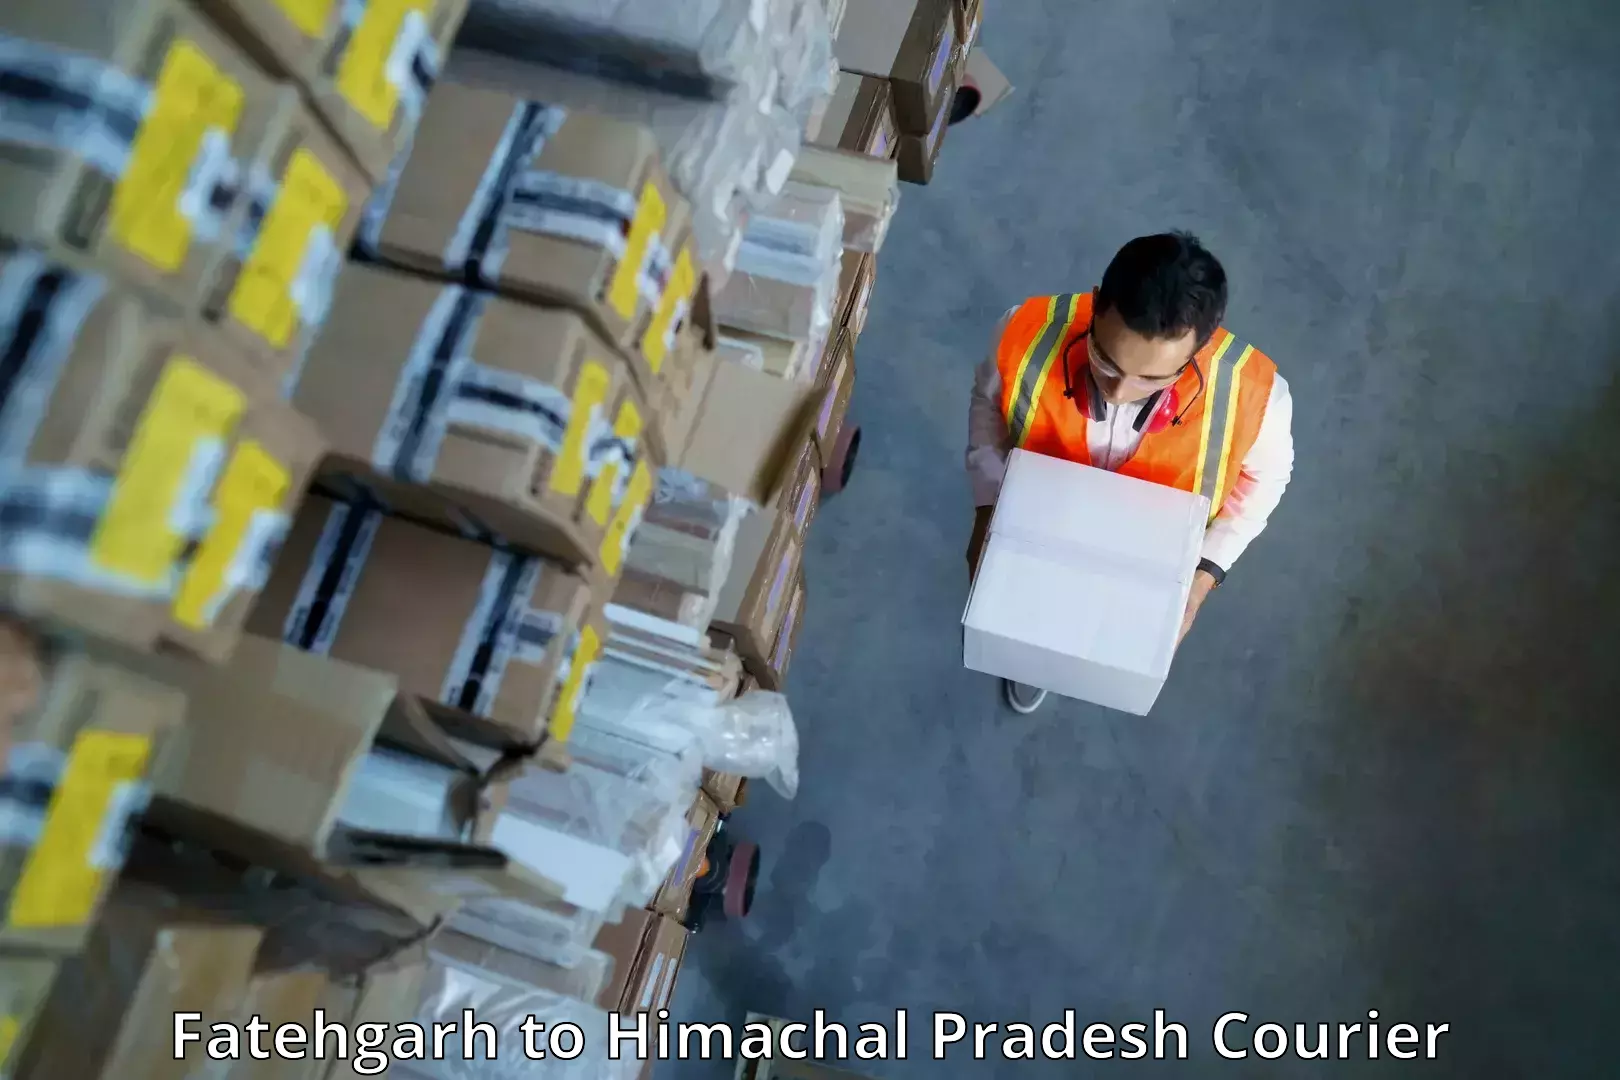 Package delivery network Fatehgarh to Himachal Pradesh